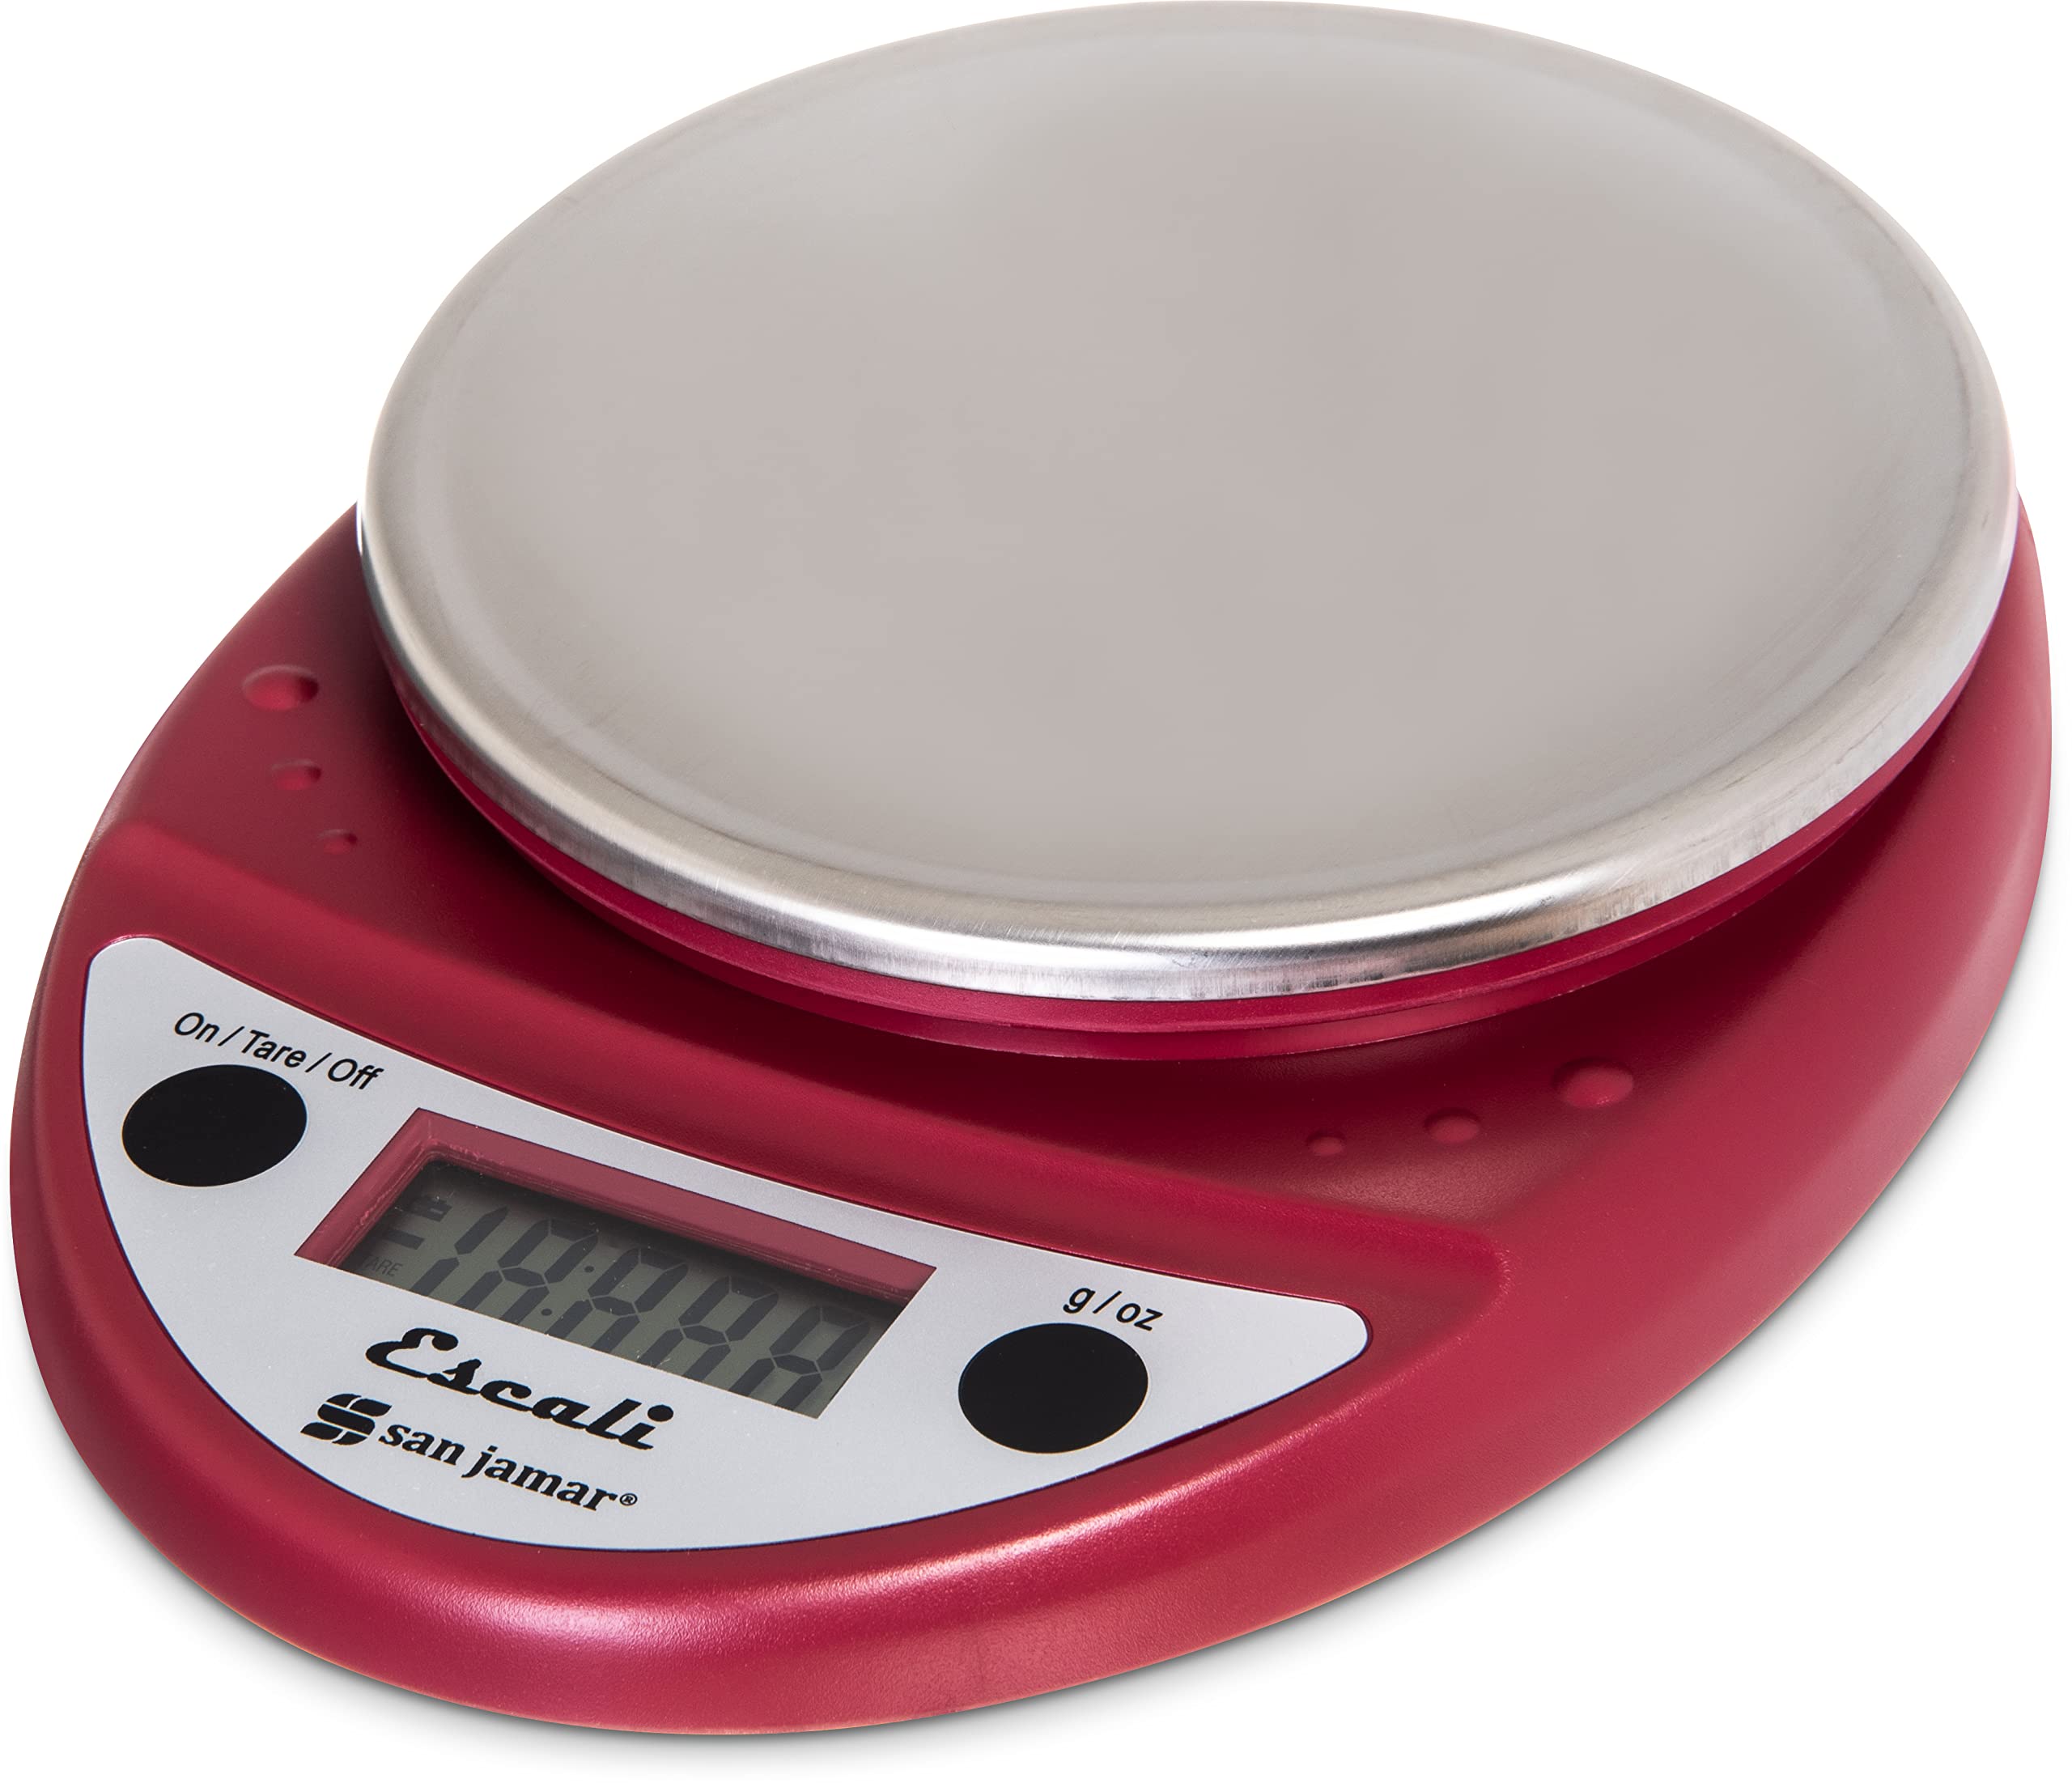 Food Scale 22lb Digital Kitchen Scale with 1g/0.05oz Precise Graduation, 5 Units LCD Display Scale for Cooking/Baking in kg, G, oz, mL, and lb, Easy